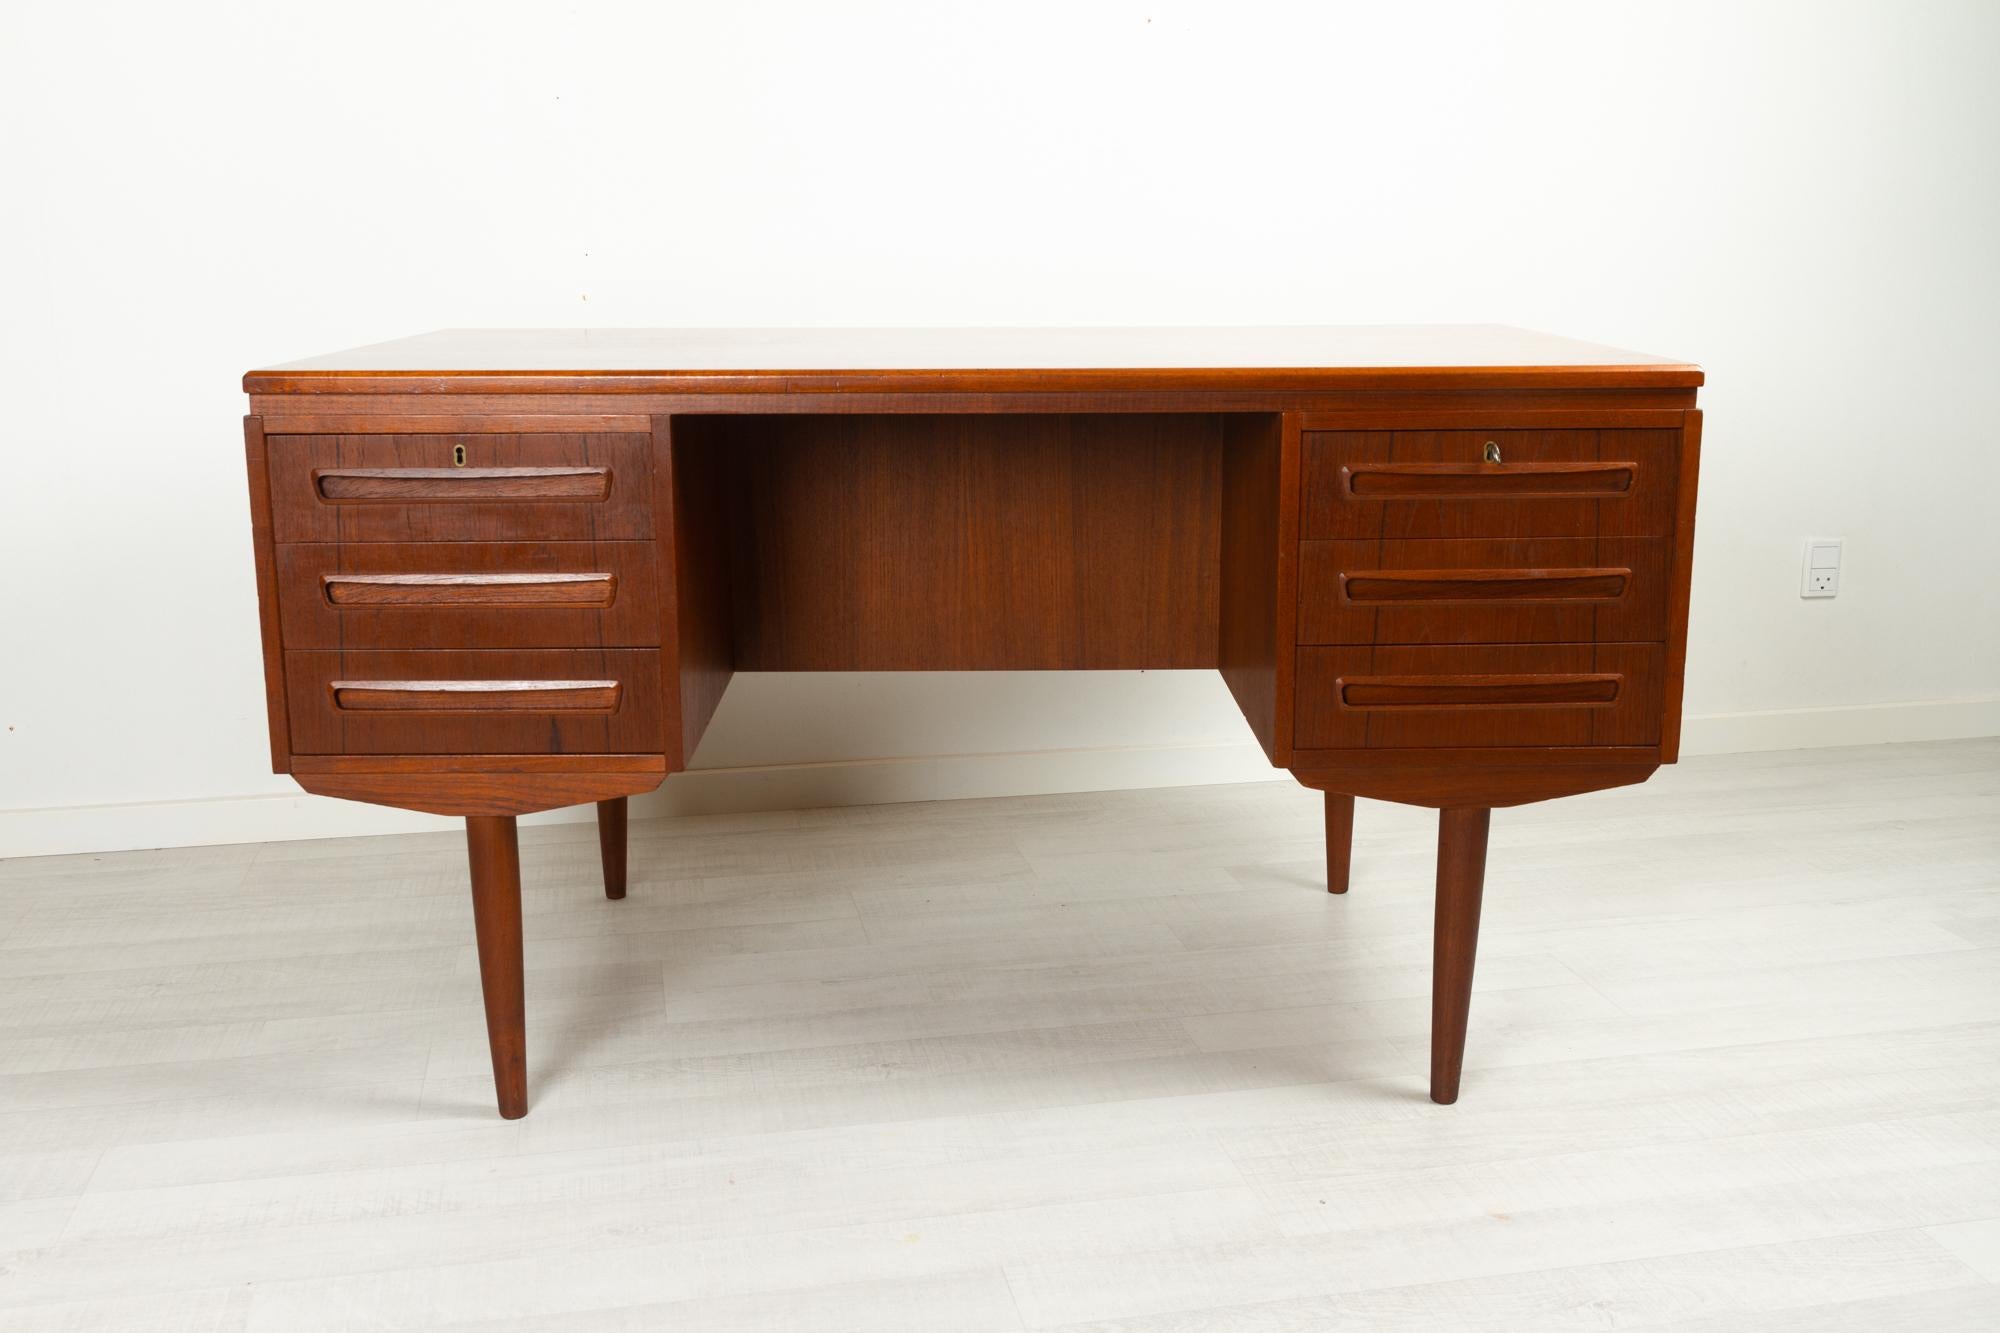 Vintage Danish teak desk 1960s
Danish Mid-Century Modern freestanding teak writing desk. Model 26 made by Andreas Pedersens Møbelfabrik in Svenstrup (AP Møbler) 
Front with two drawer compartments with three drawers each. Top drawers with lock.